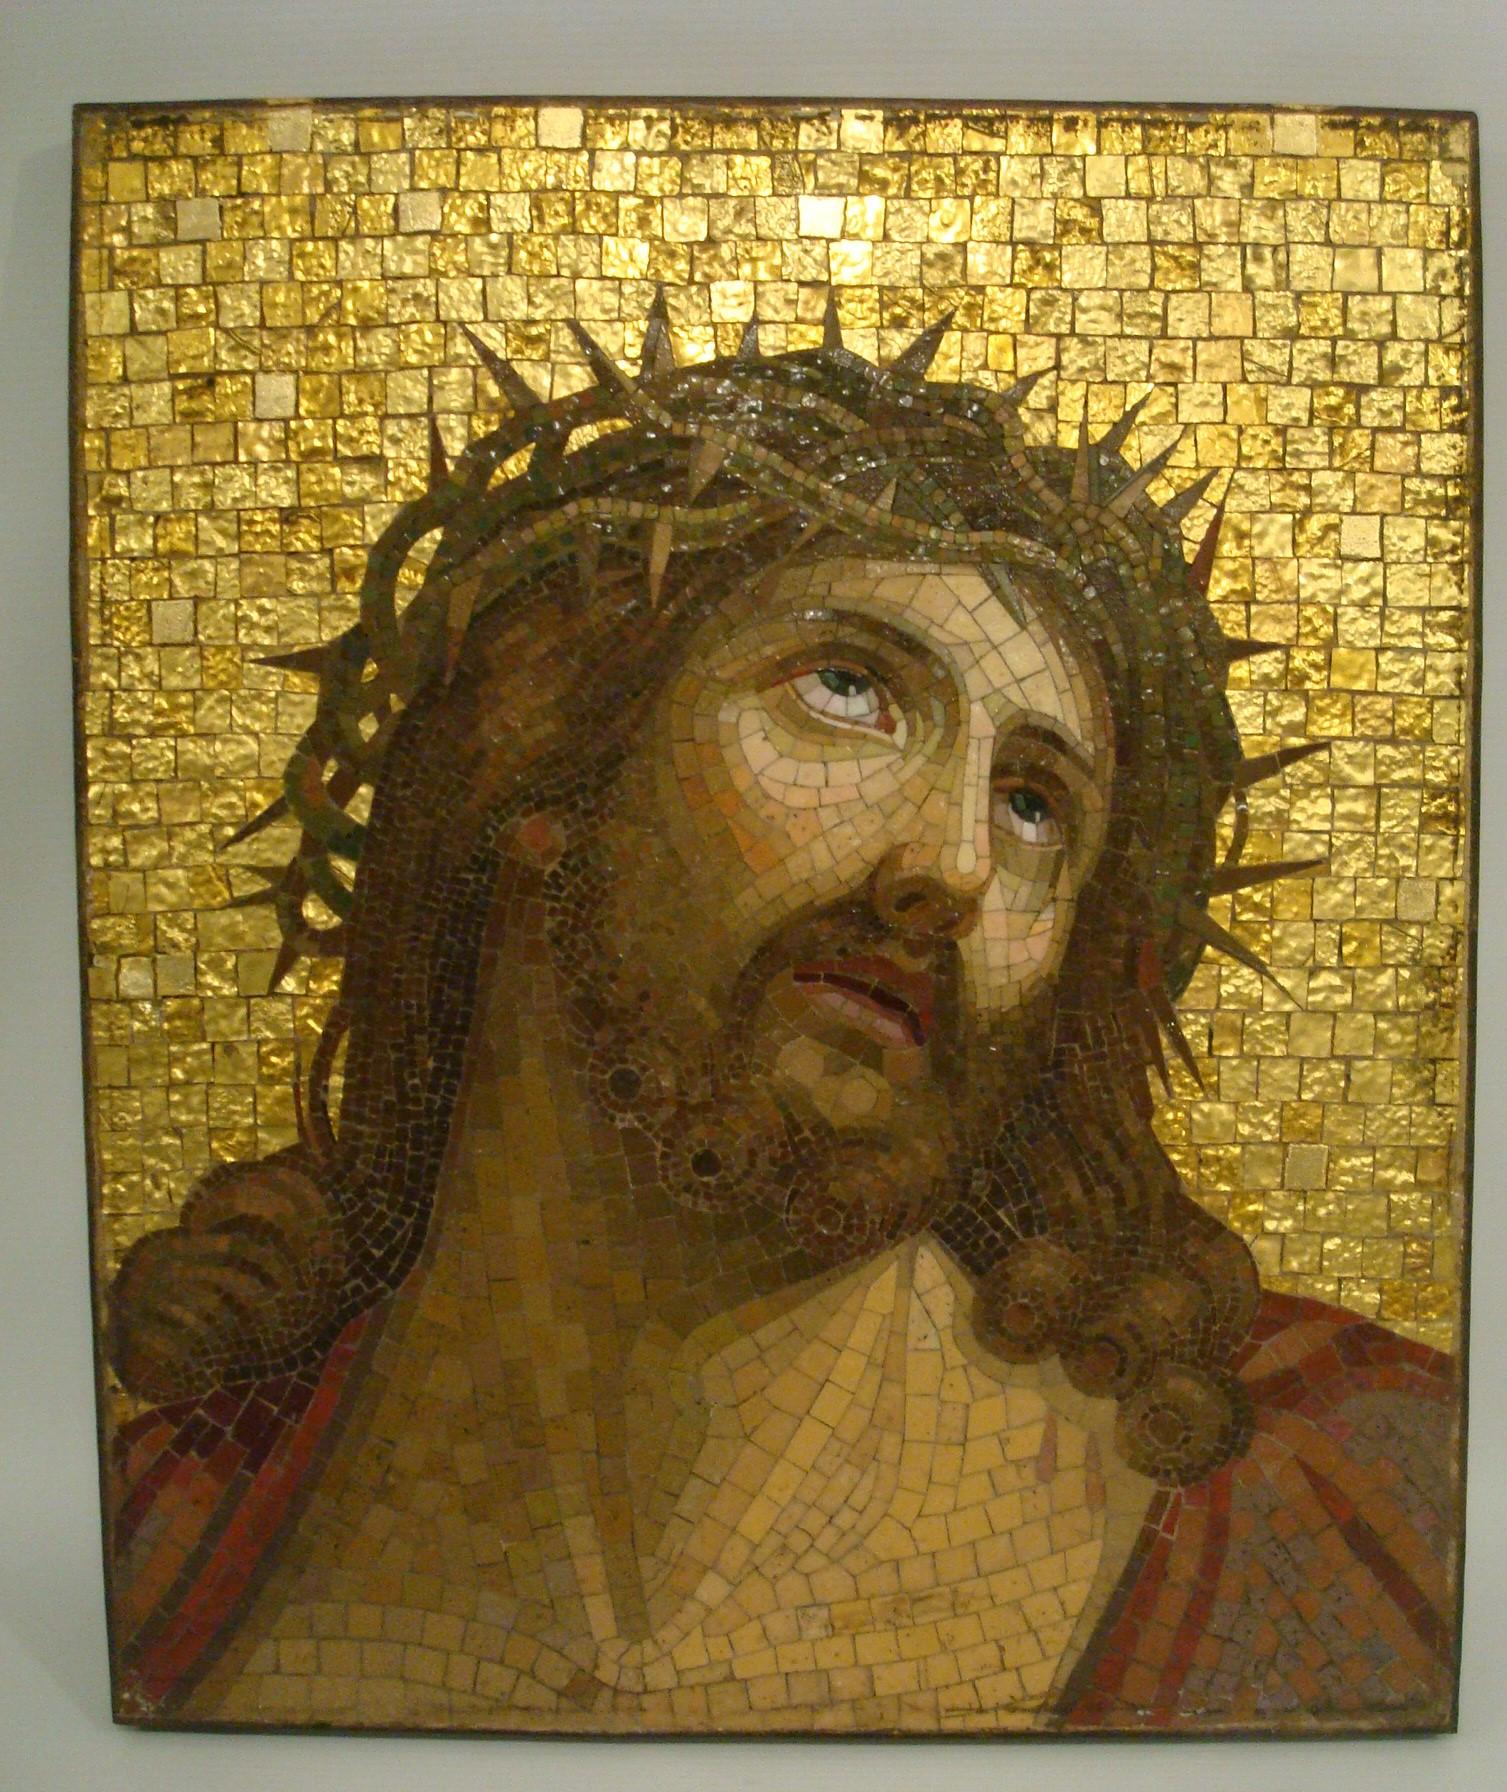 19th Century Mosaic Jesus Christ With the Crown of Thorns Plaque - Panel Religious Art . Jesus Christ with the Crown of thorns handmade mosaic It is made by the original byzantine technology.